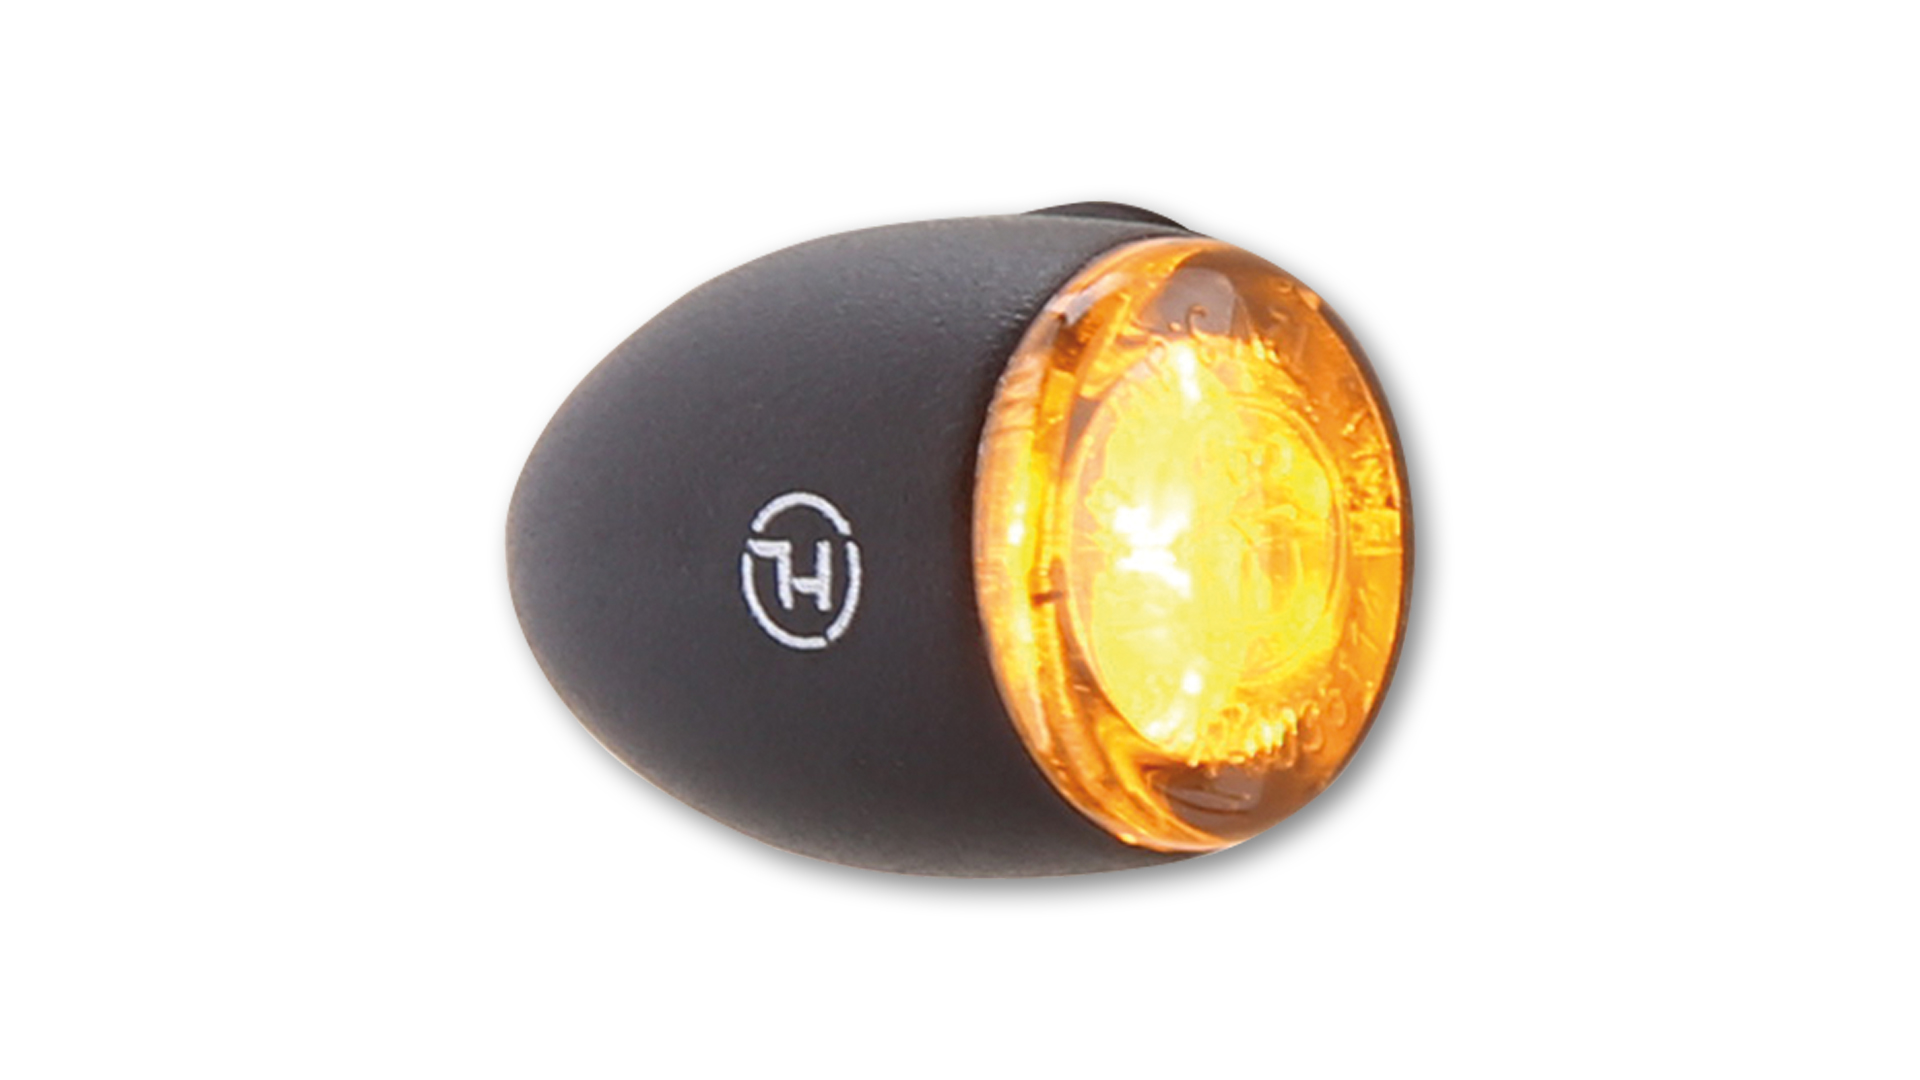 HIGHSIDER PROTON TWO LED turn signal, tinted glass, suitable for front and rear, E-tested, pair.